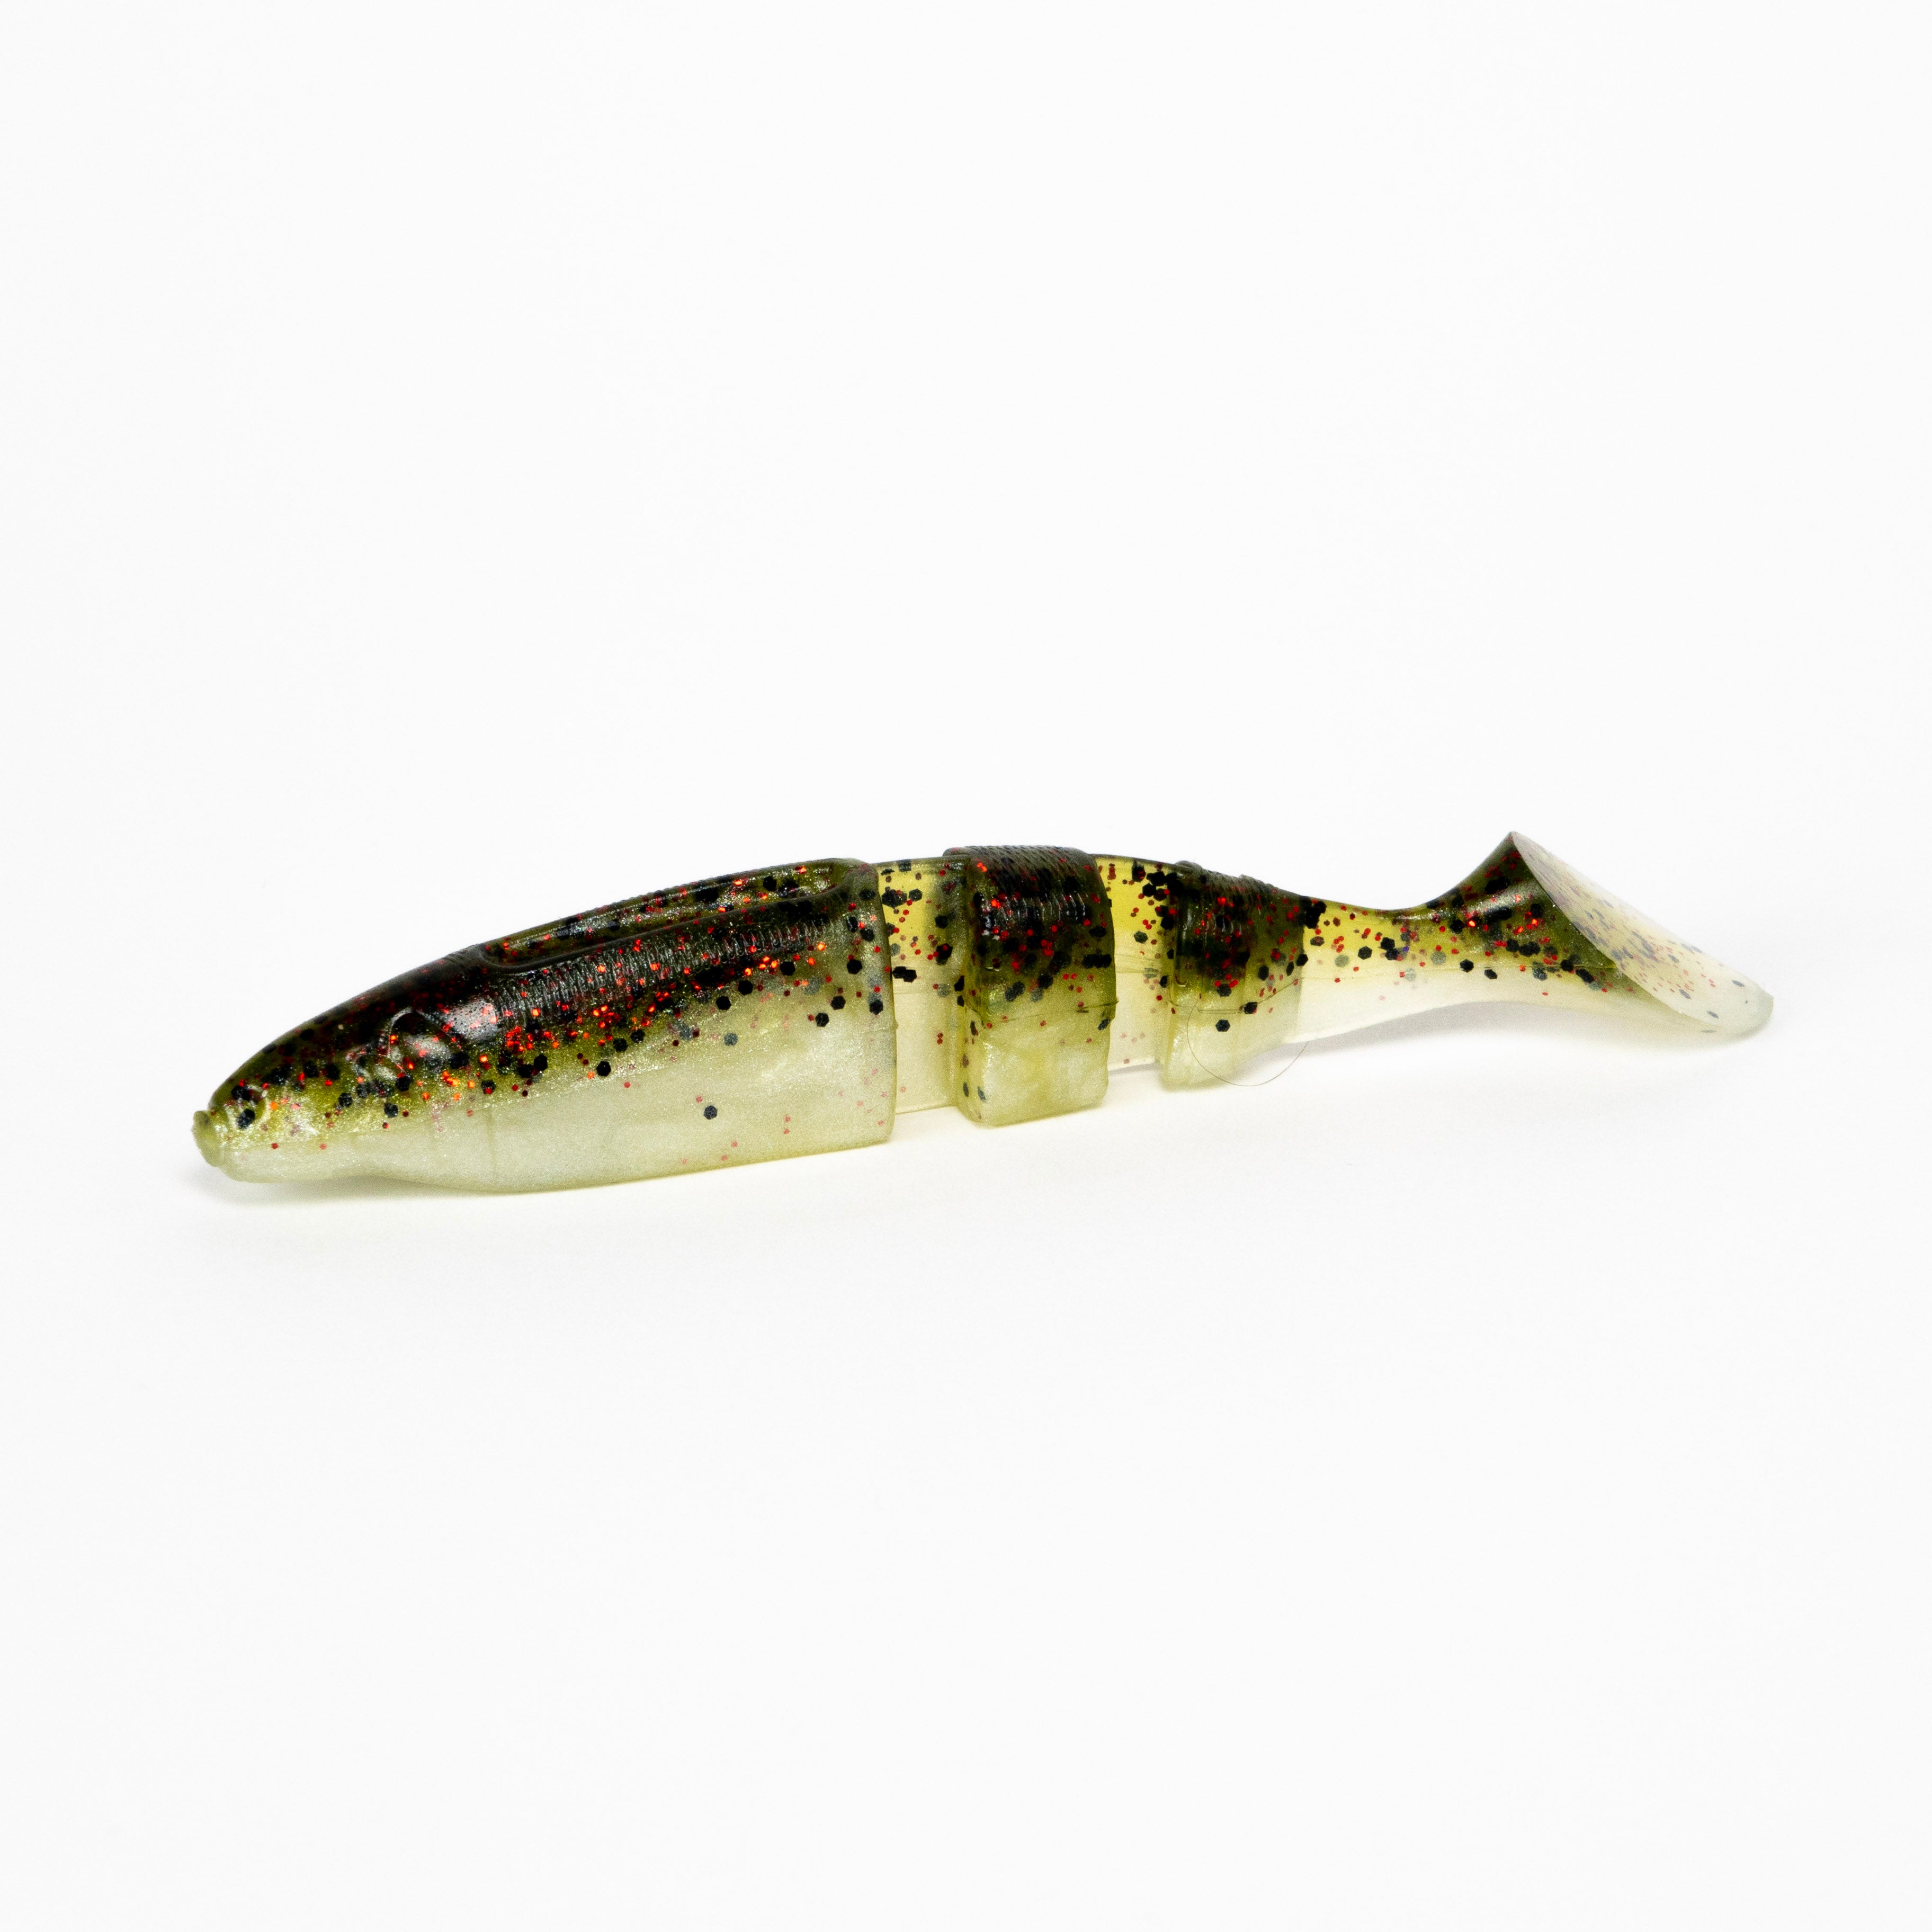 Lake Fork Trophy Lures Live Baby Shad Swimbait - Chartreuse Ice